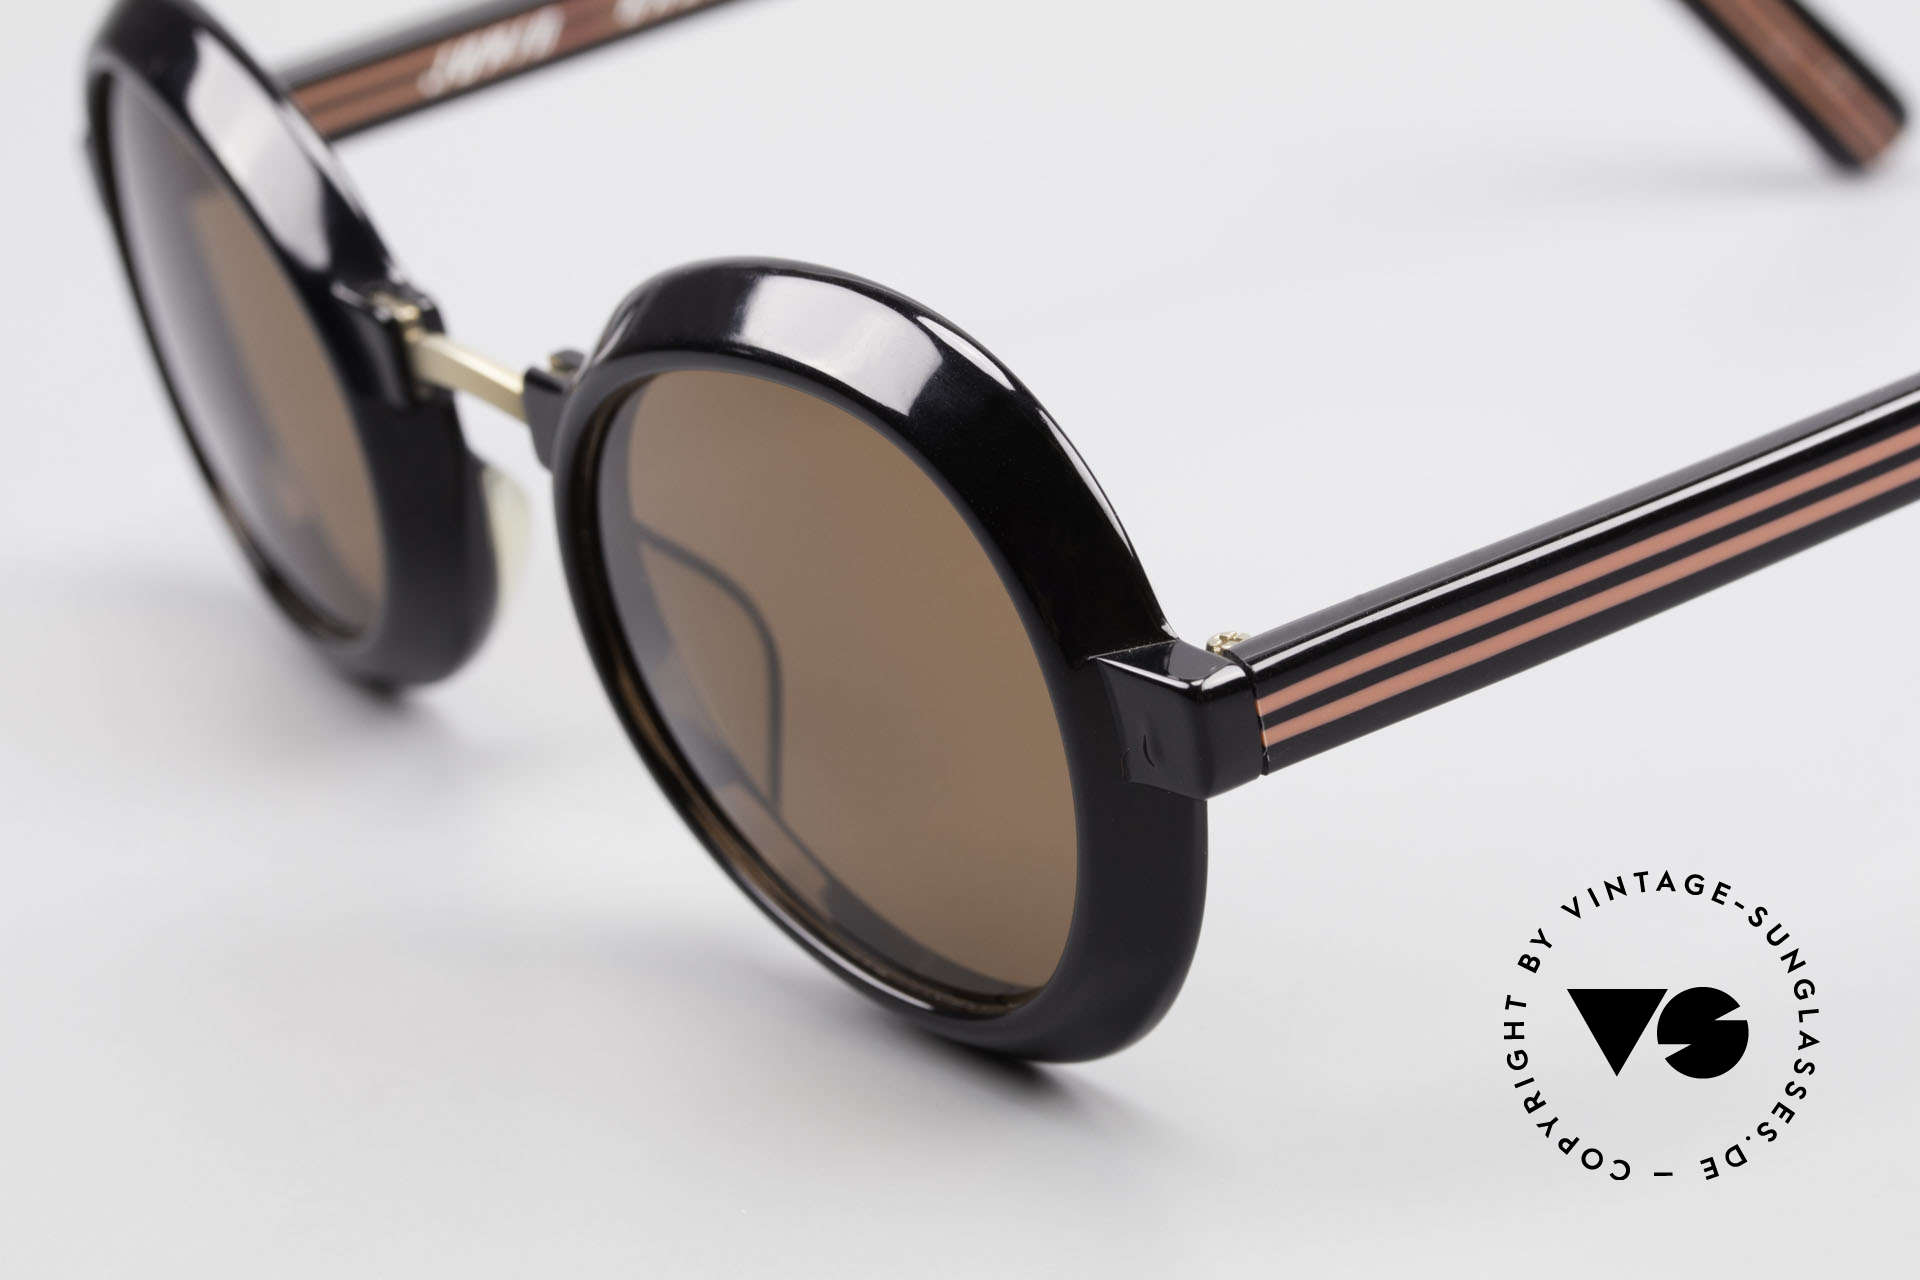 Jean Paul Gaultier 58-1274 Junior Gaultier Vintage Shades, true rarity in high-end quality (100% UV protect.), Made for Men and Women